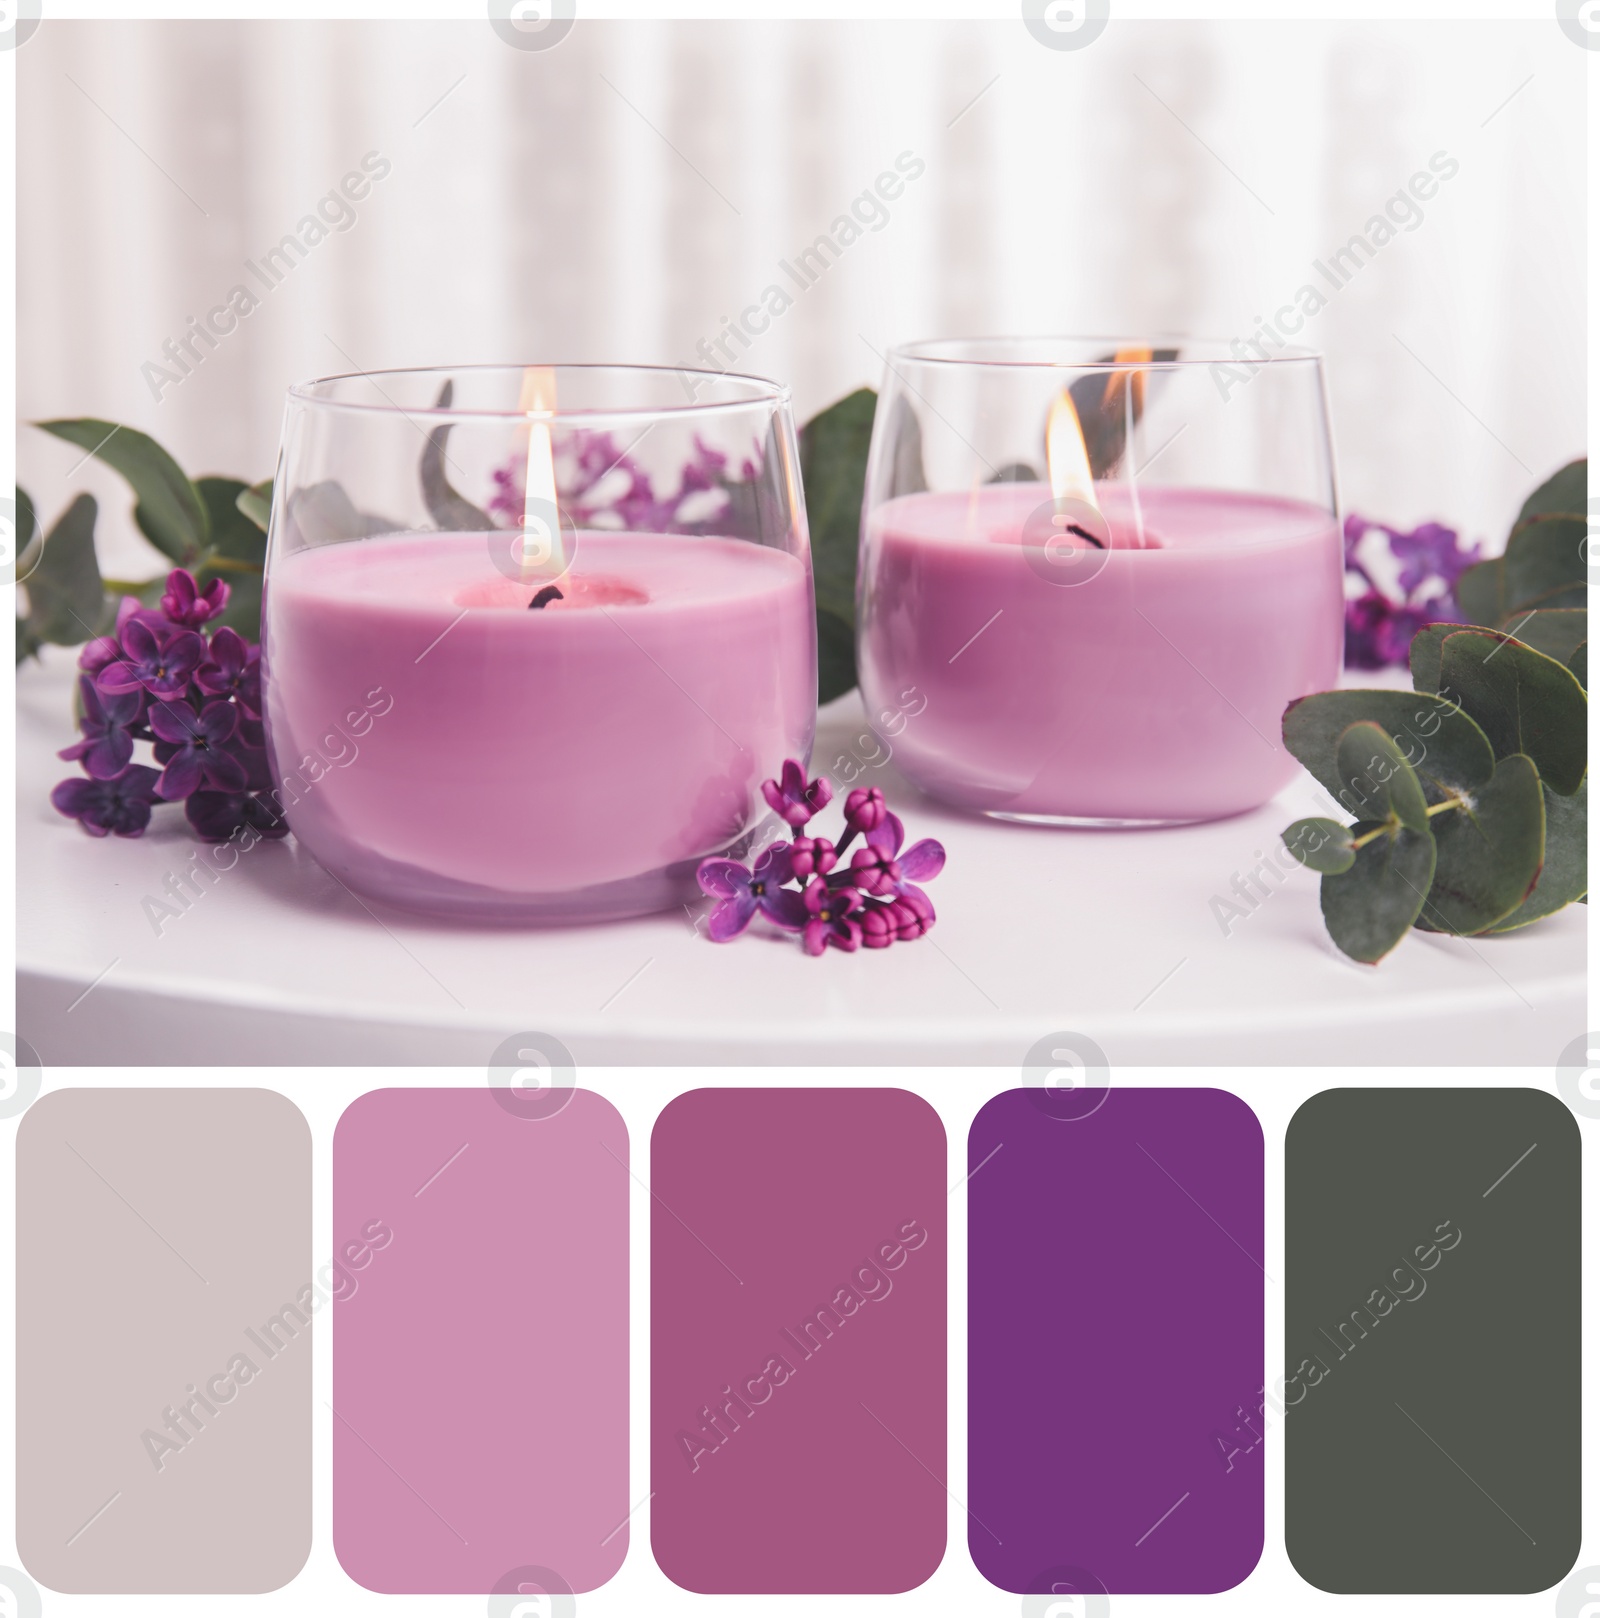 Image of Color palette appropriate to photo of burning candles in glass holders and flowers on white table